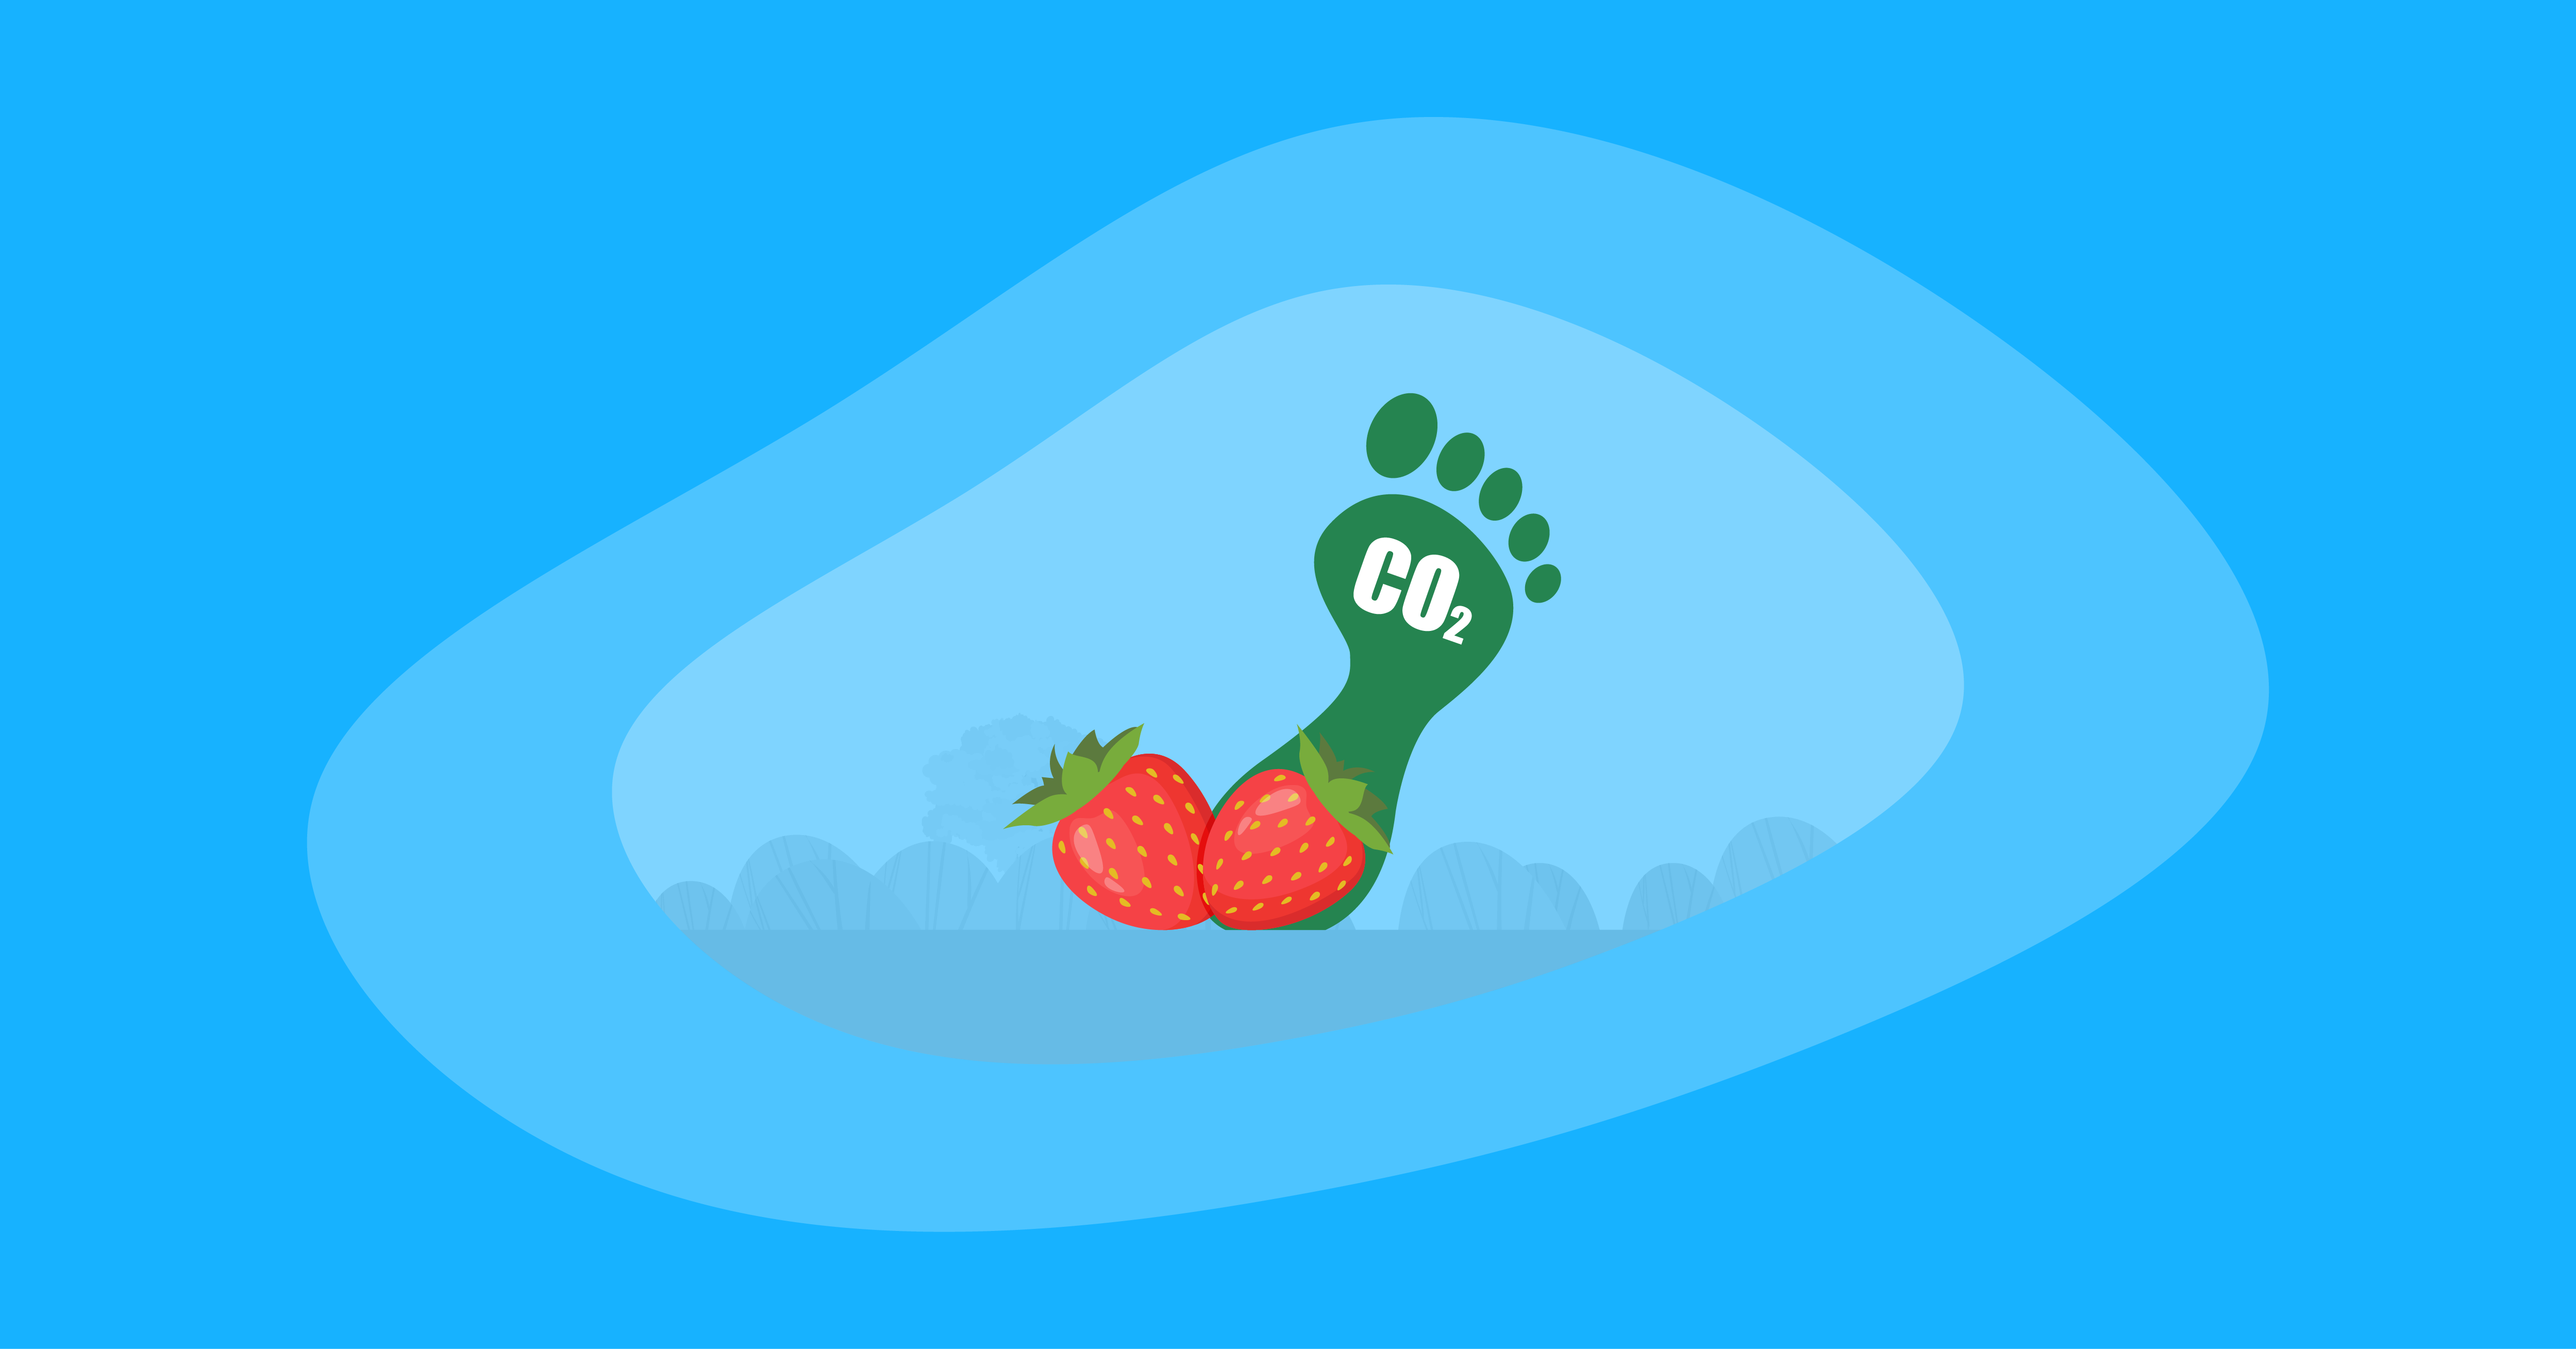 Attempted illustration of strawberries with their carbon footprint